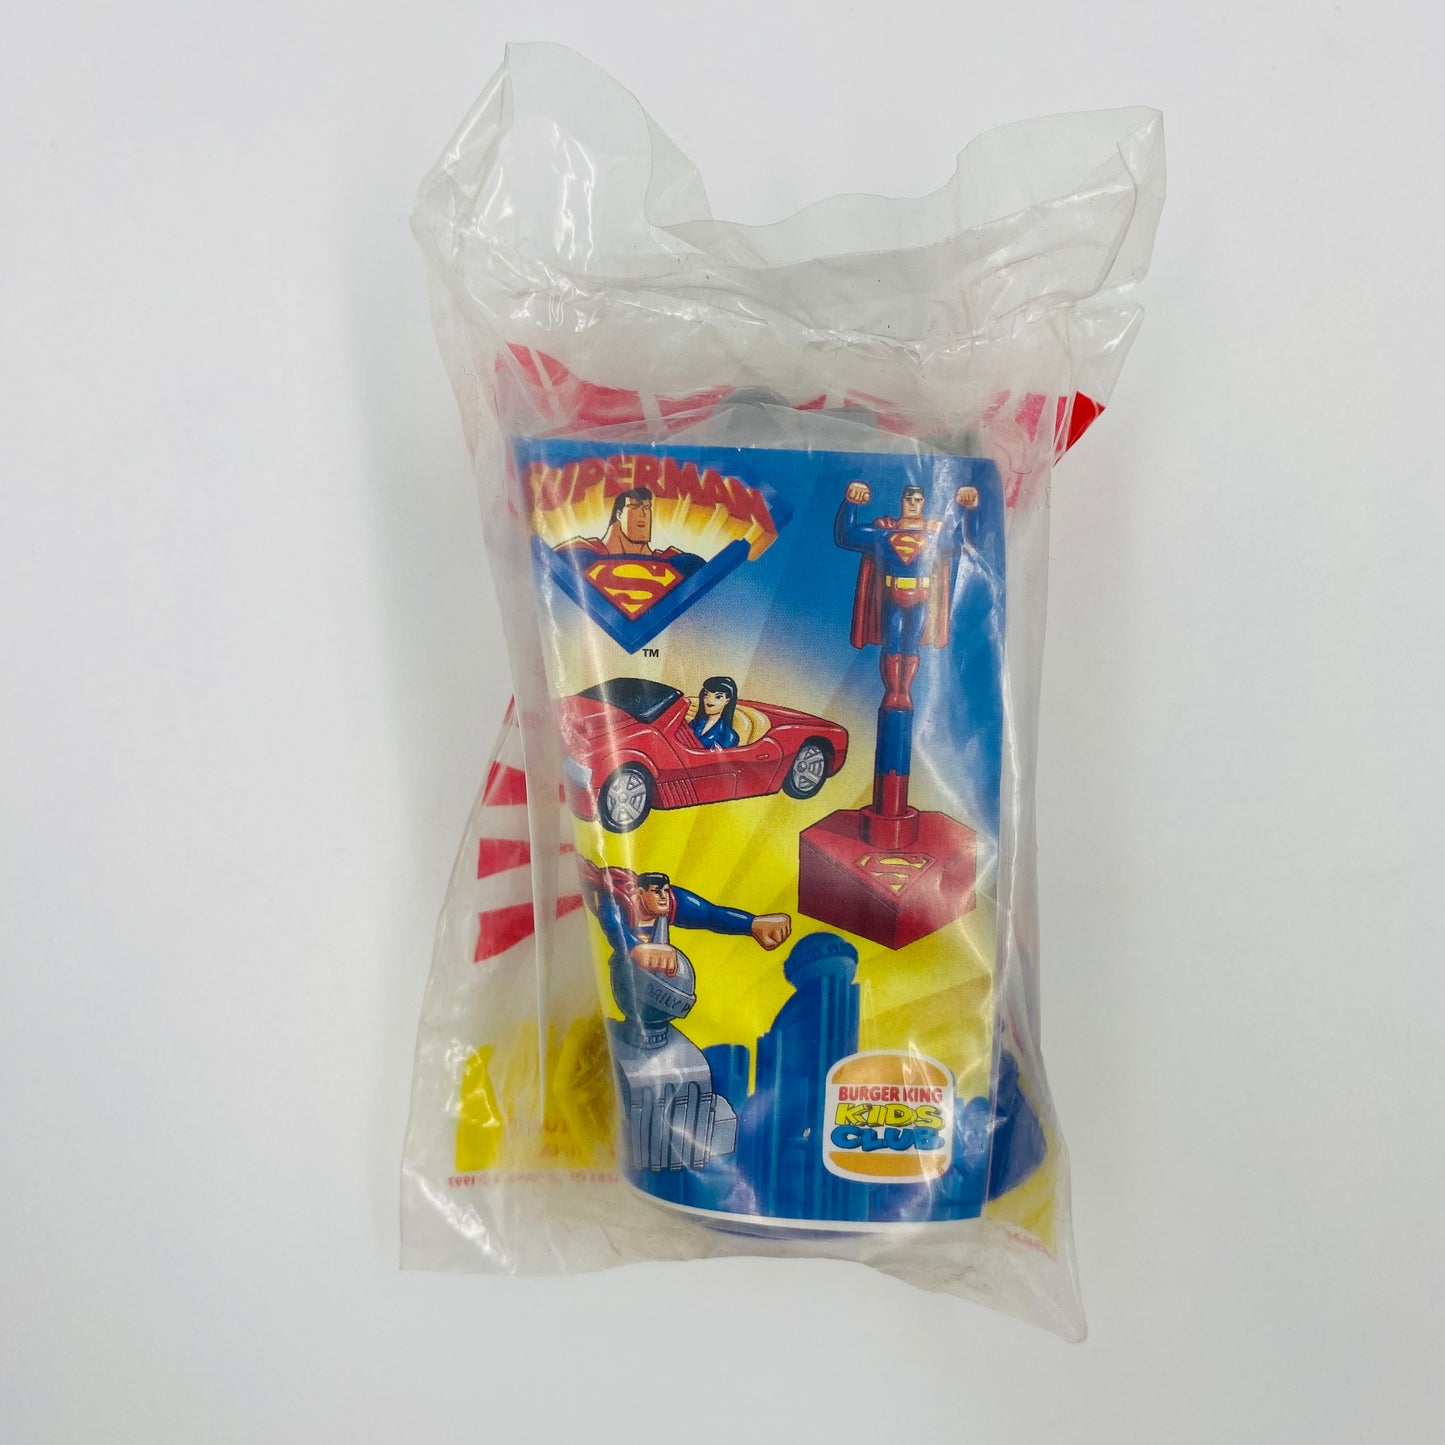 Superman The Animated Series Phone Booth Burger King Kids' Meals toy (1997) bagged